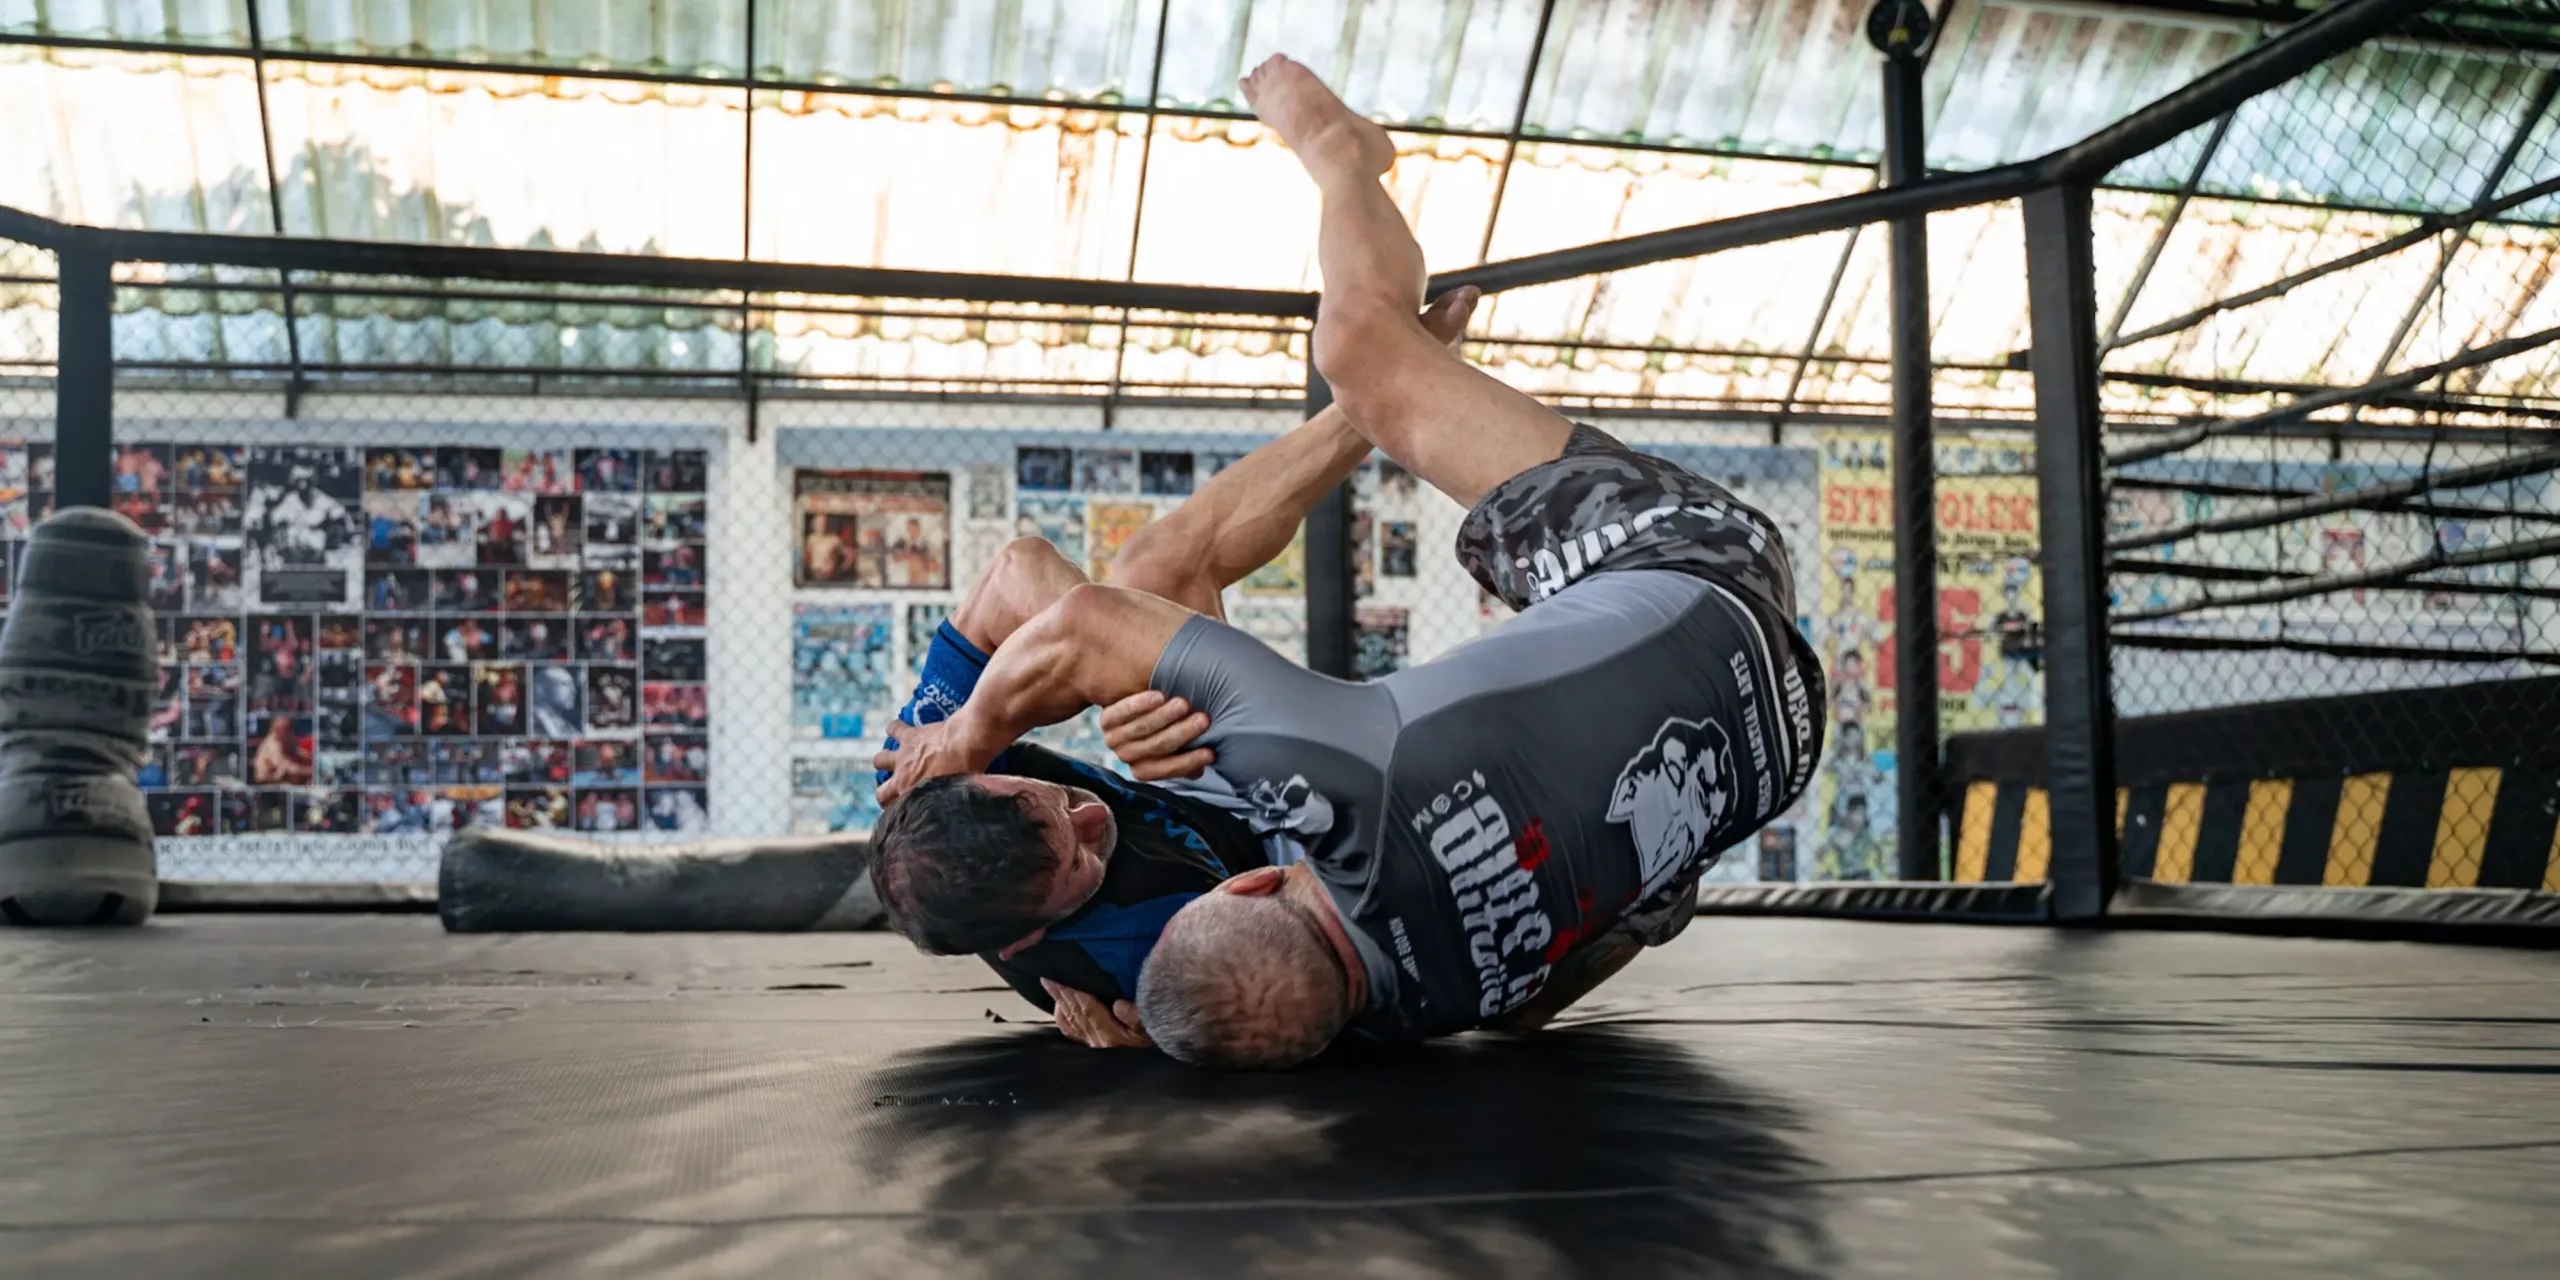 A BJJ practitioner executes an inverted guard, a complex and dynamic defensive position, against a training partner, highlighting the fluidity and flexibility required in Brazilian Jiu-Jitsu.